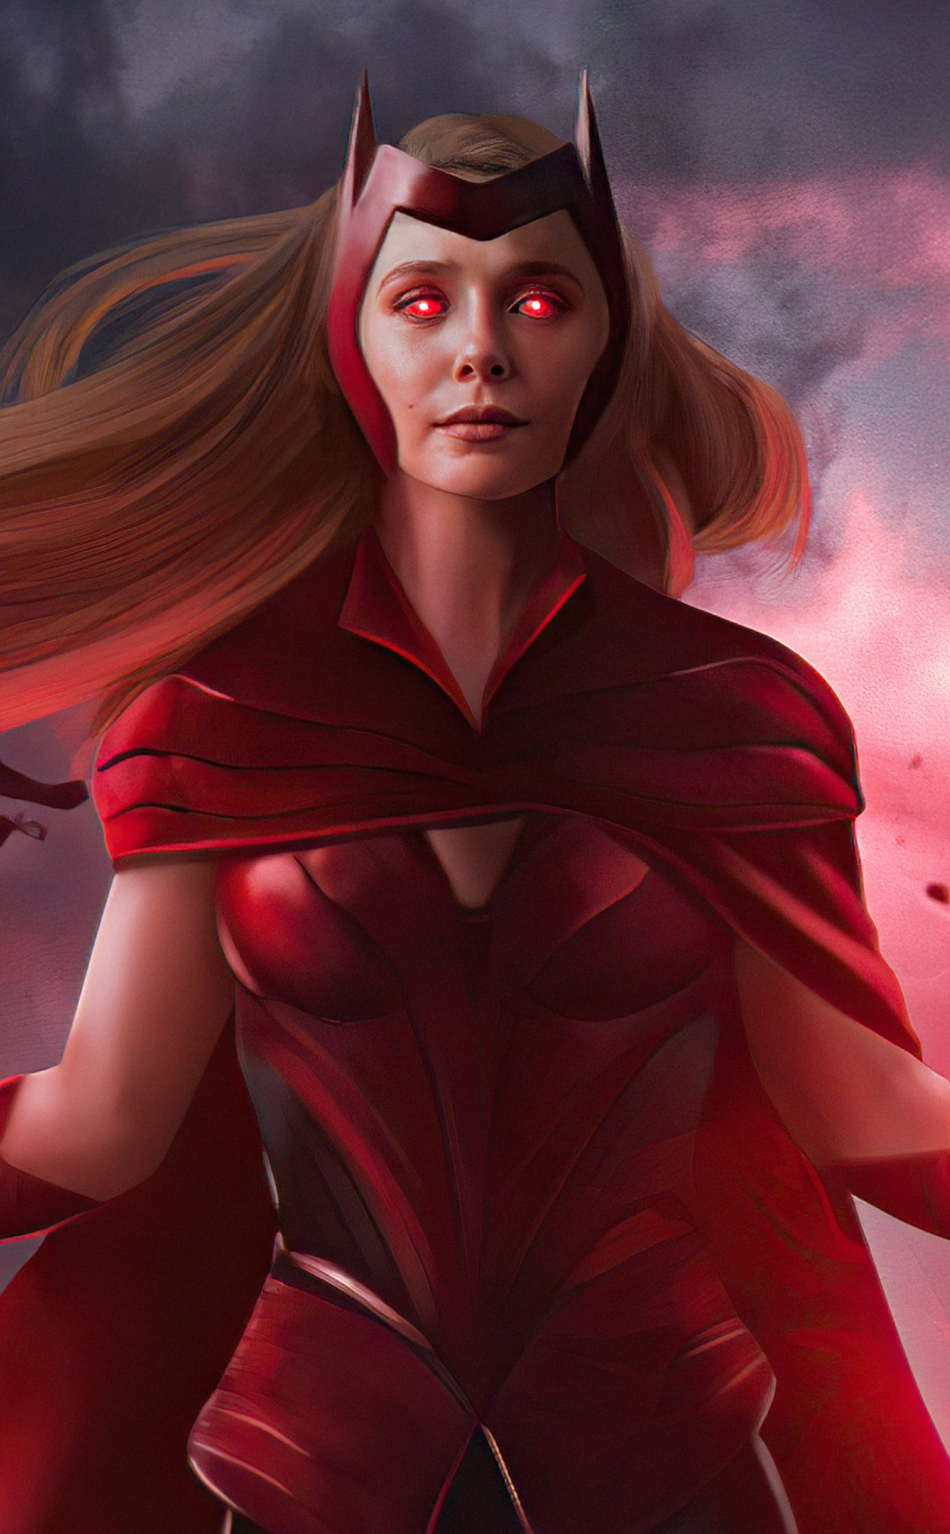 Download wallpaper 950x1534 the scarlet witch, wanda vision, fan art, iphone, 950x1534 HD background, 26969